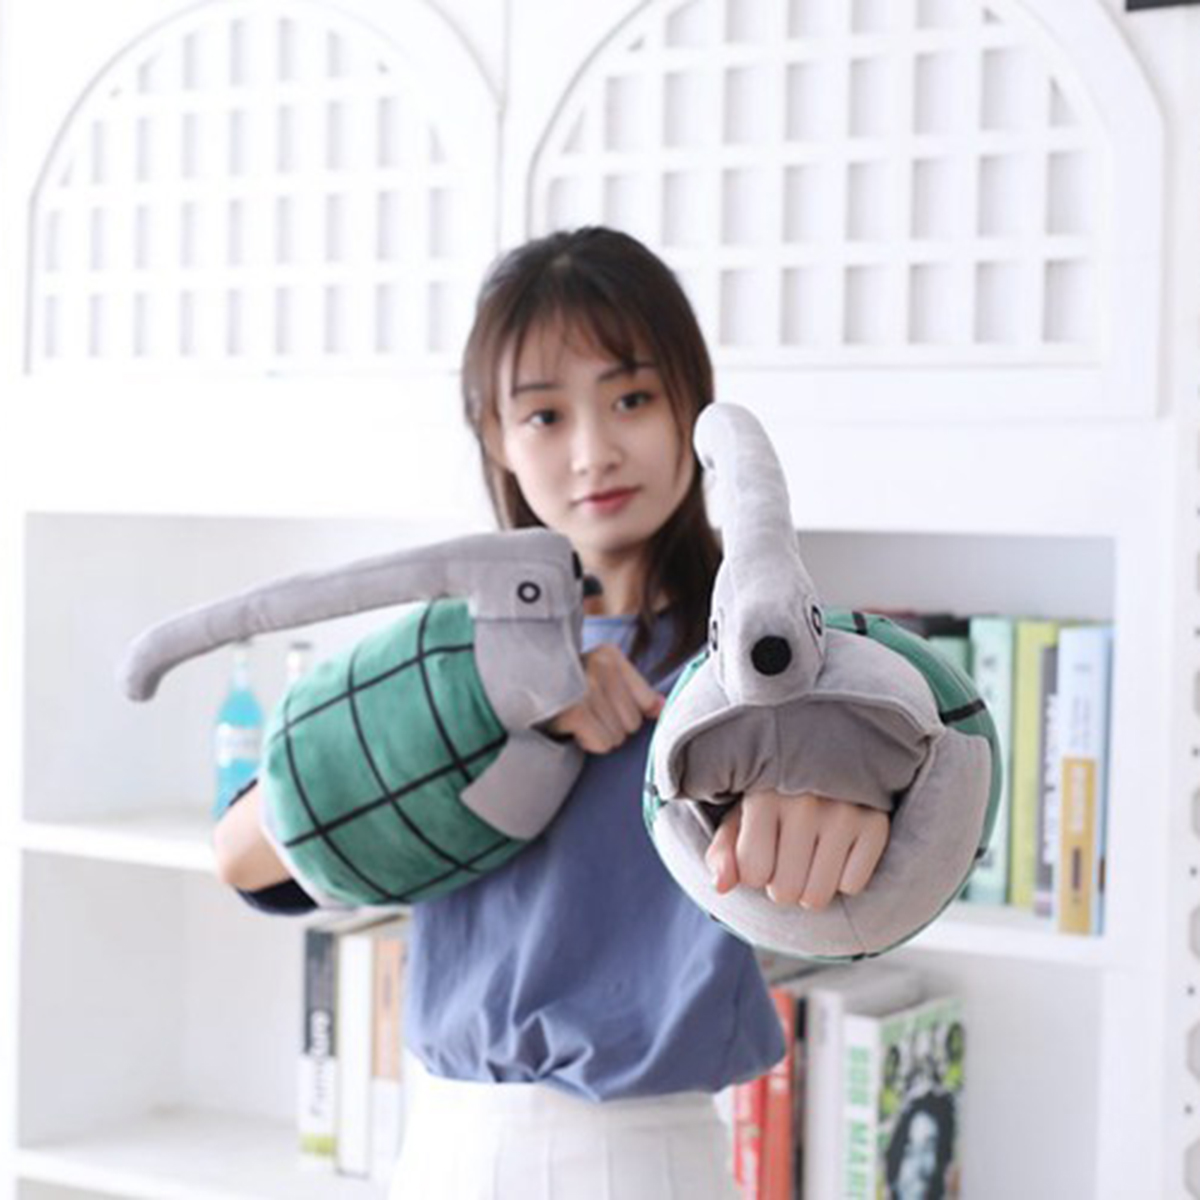 1-Pair-Costumes-Grenade-Gloves-Stuffed-Plush-Toy-Cosplay-Prop-Christmas-Novelty-Gift-1379242